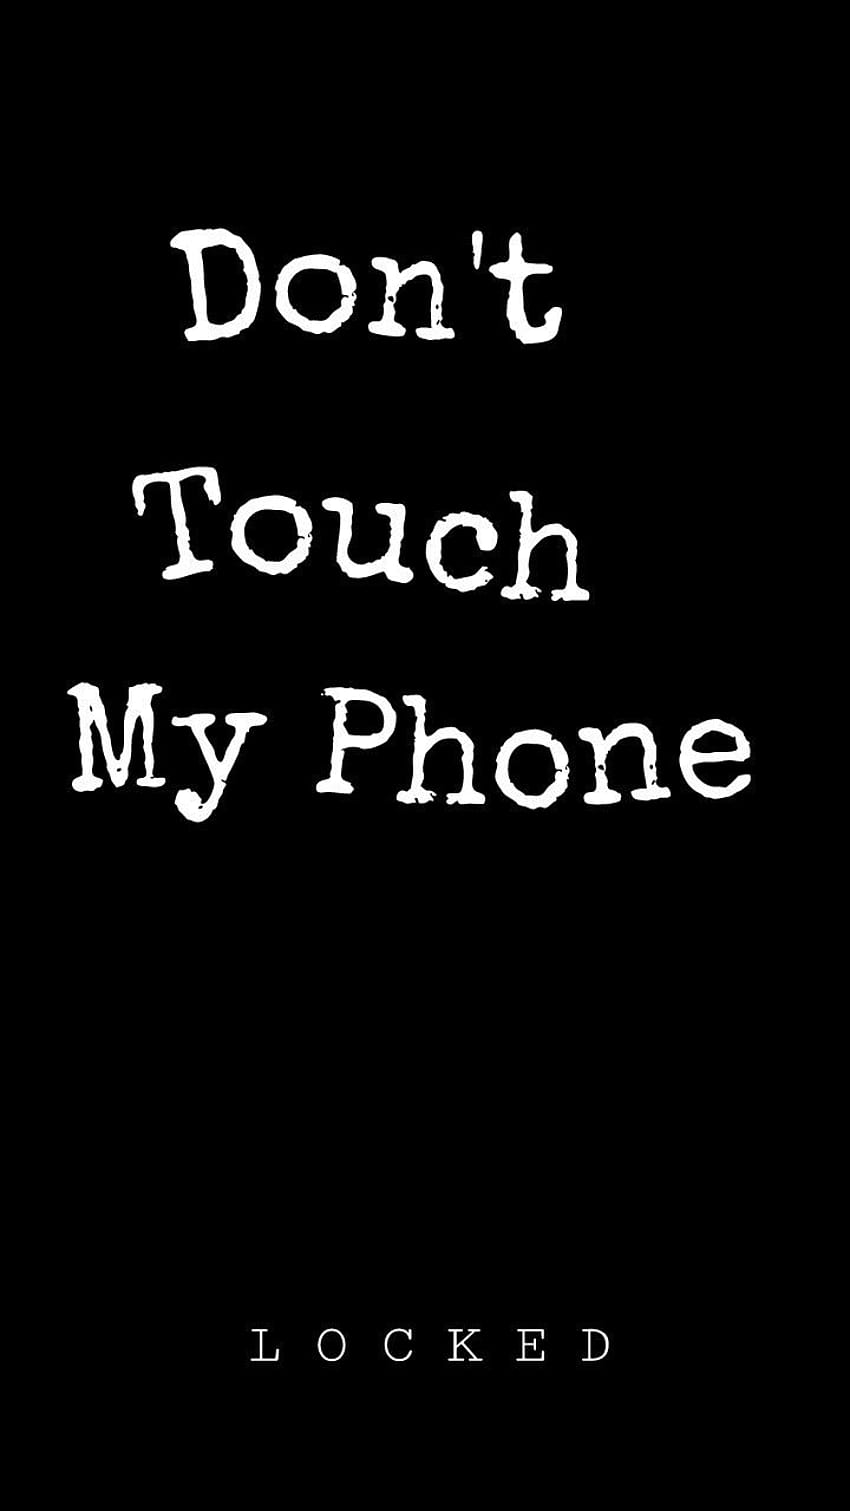 200 Dont Touch My Phone Wallpapers  Wallpaperscom